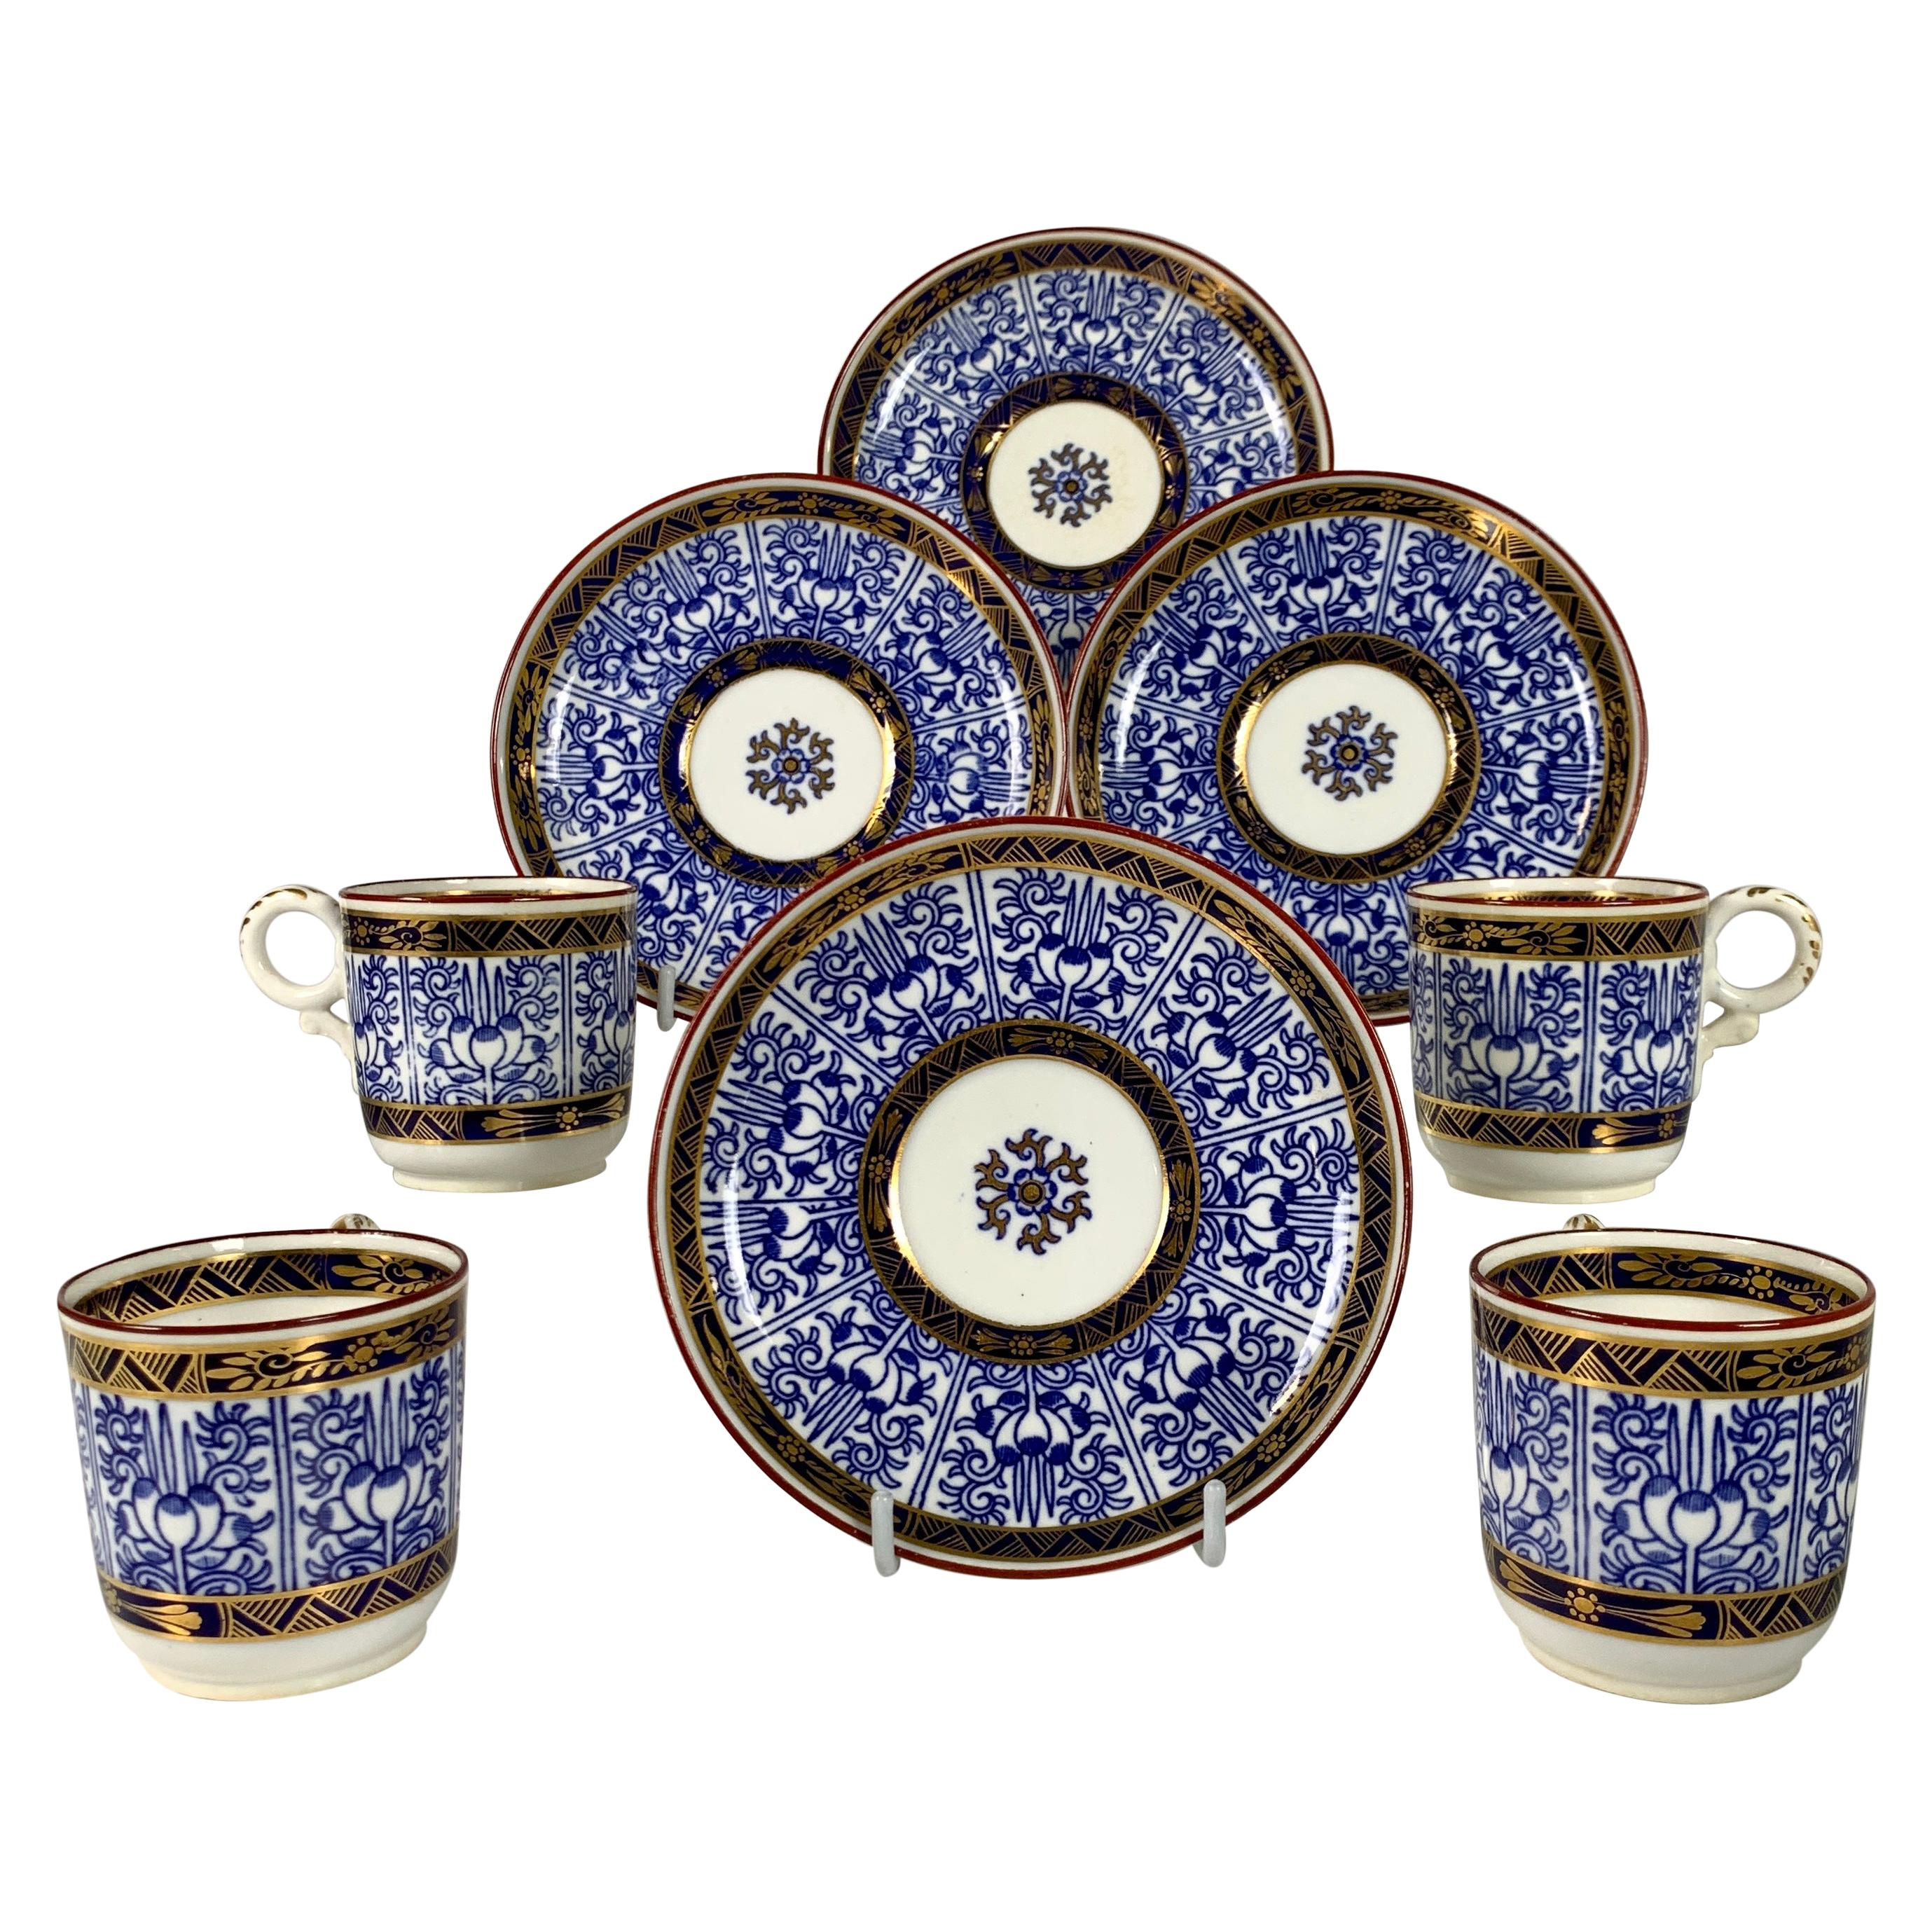 Demitasse Blue and White Porcelain Cups and Saucers in the Royal Lily Pattern